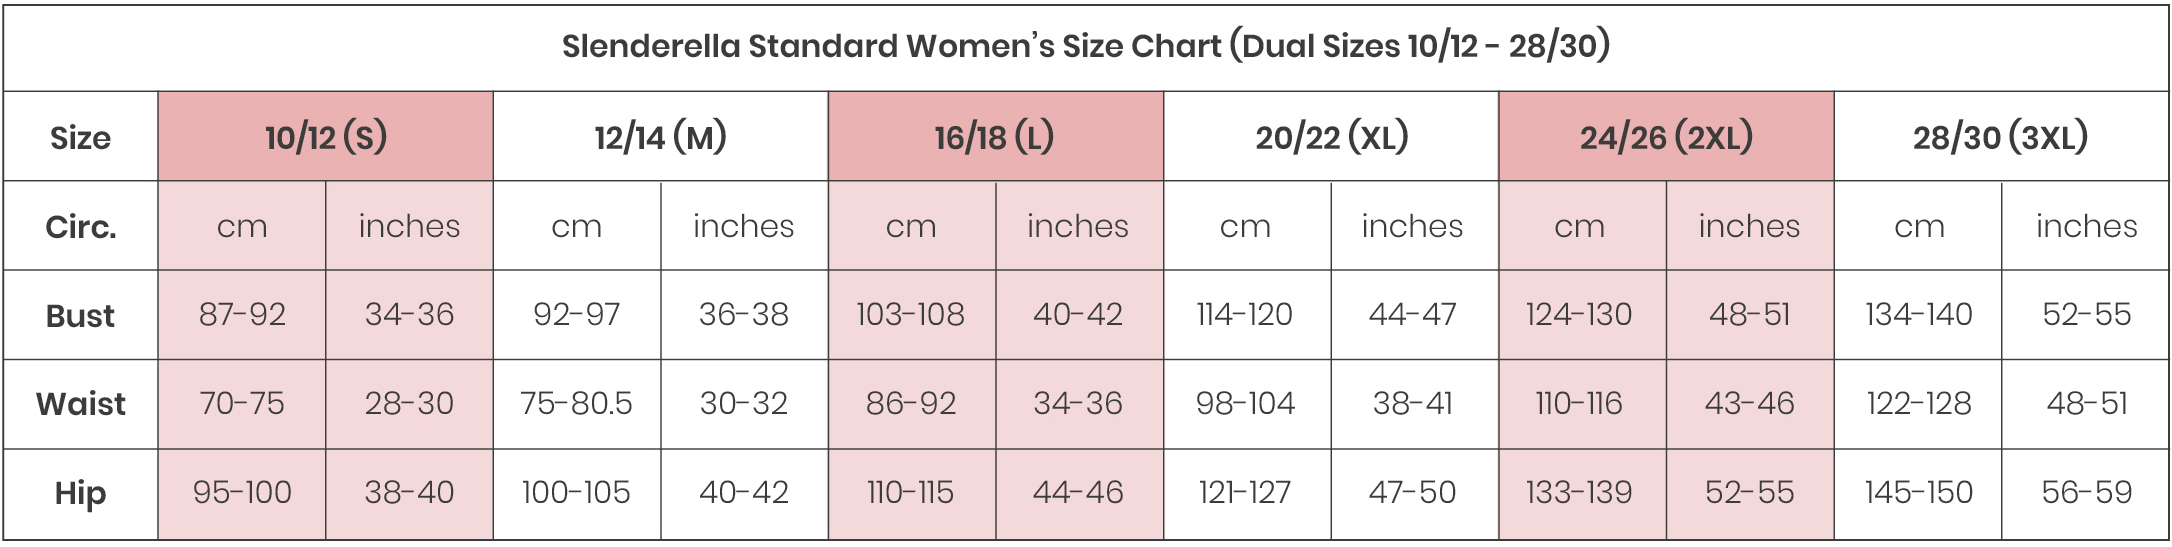 Cup Size H Plunge Bras, Band Sizes 28-50